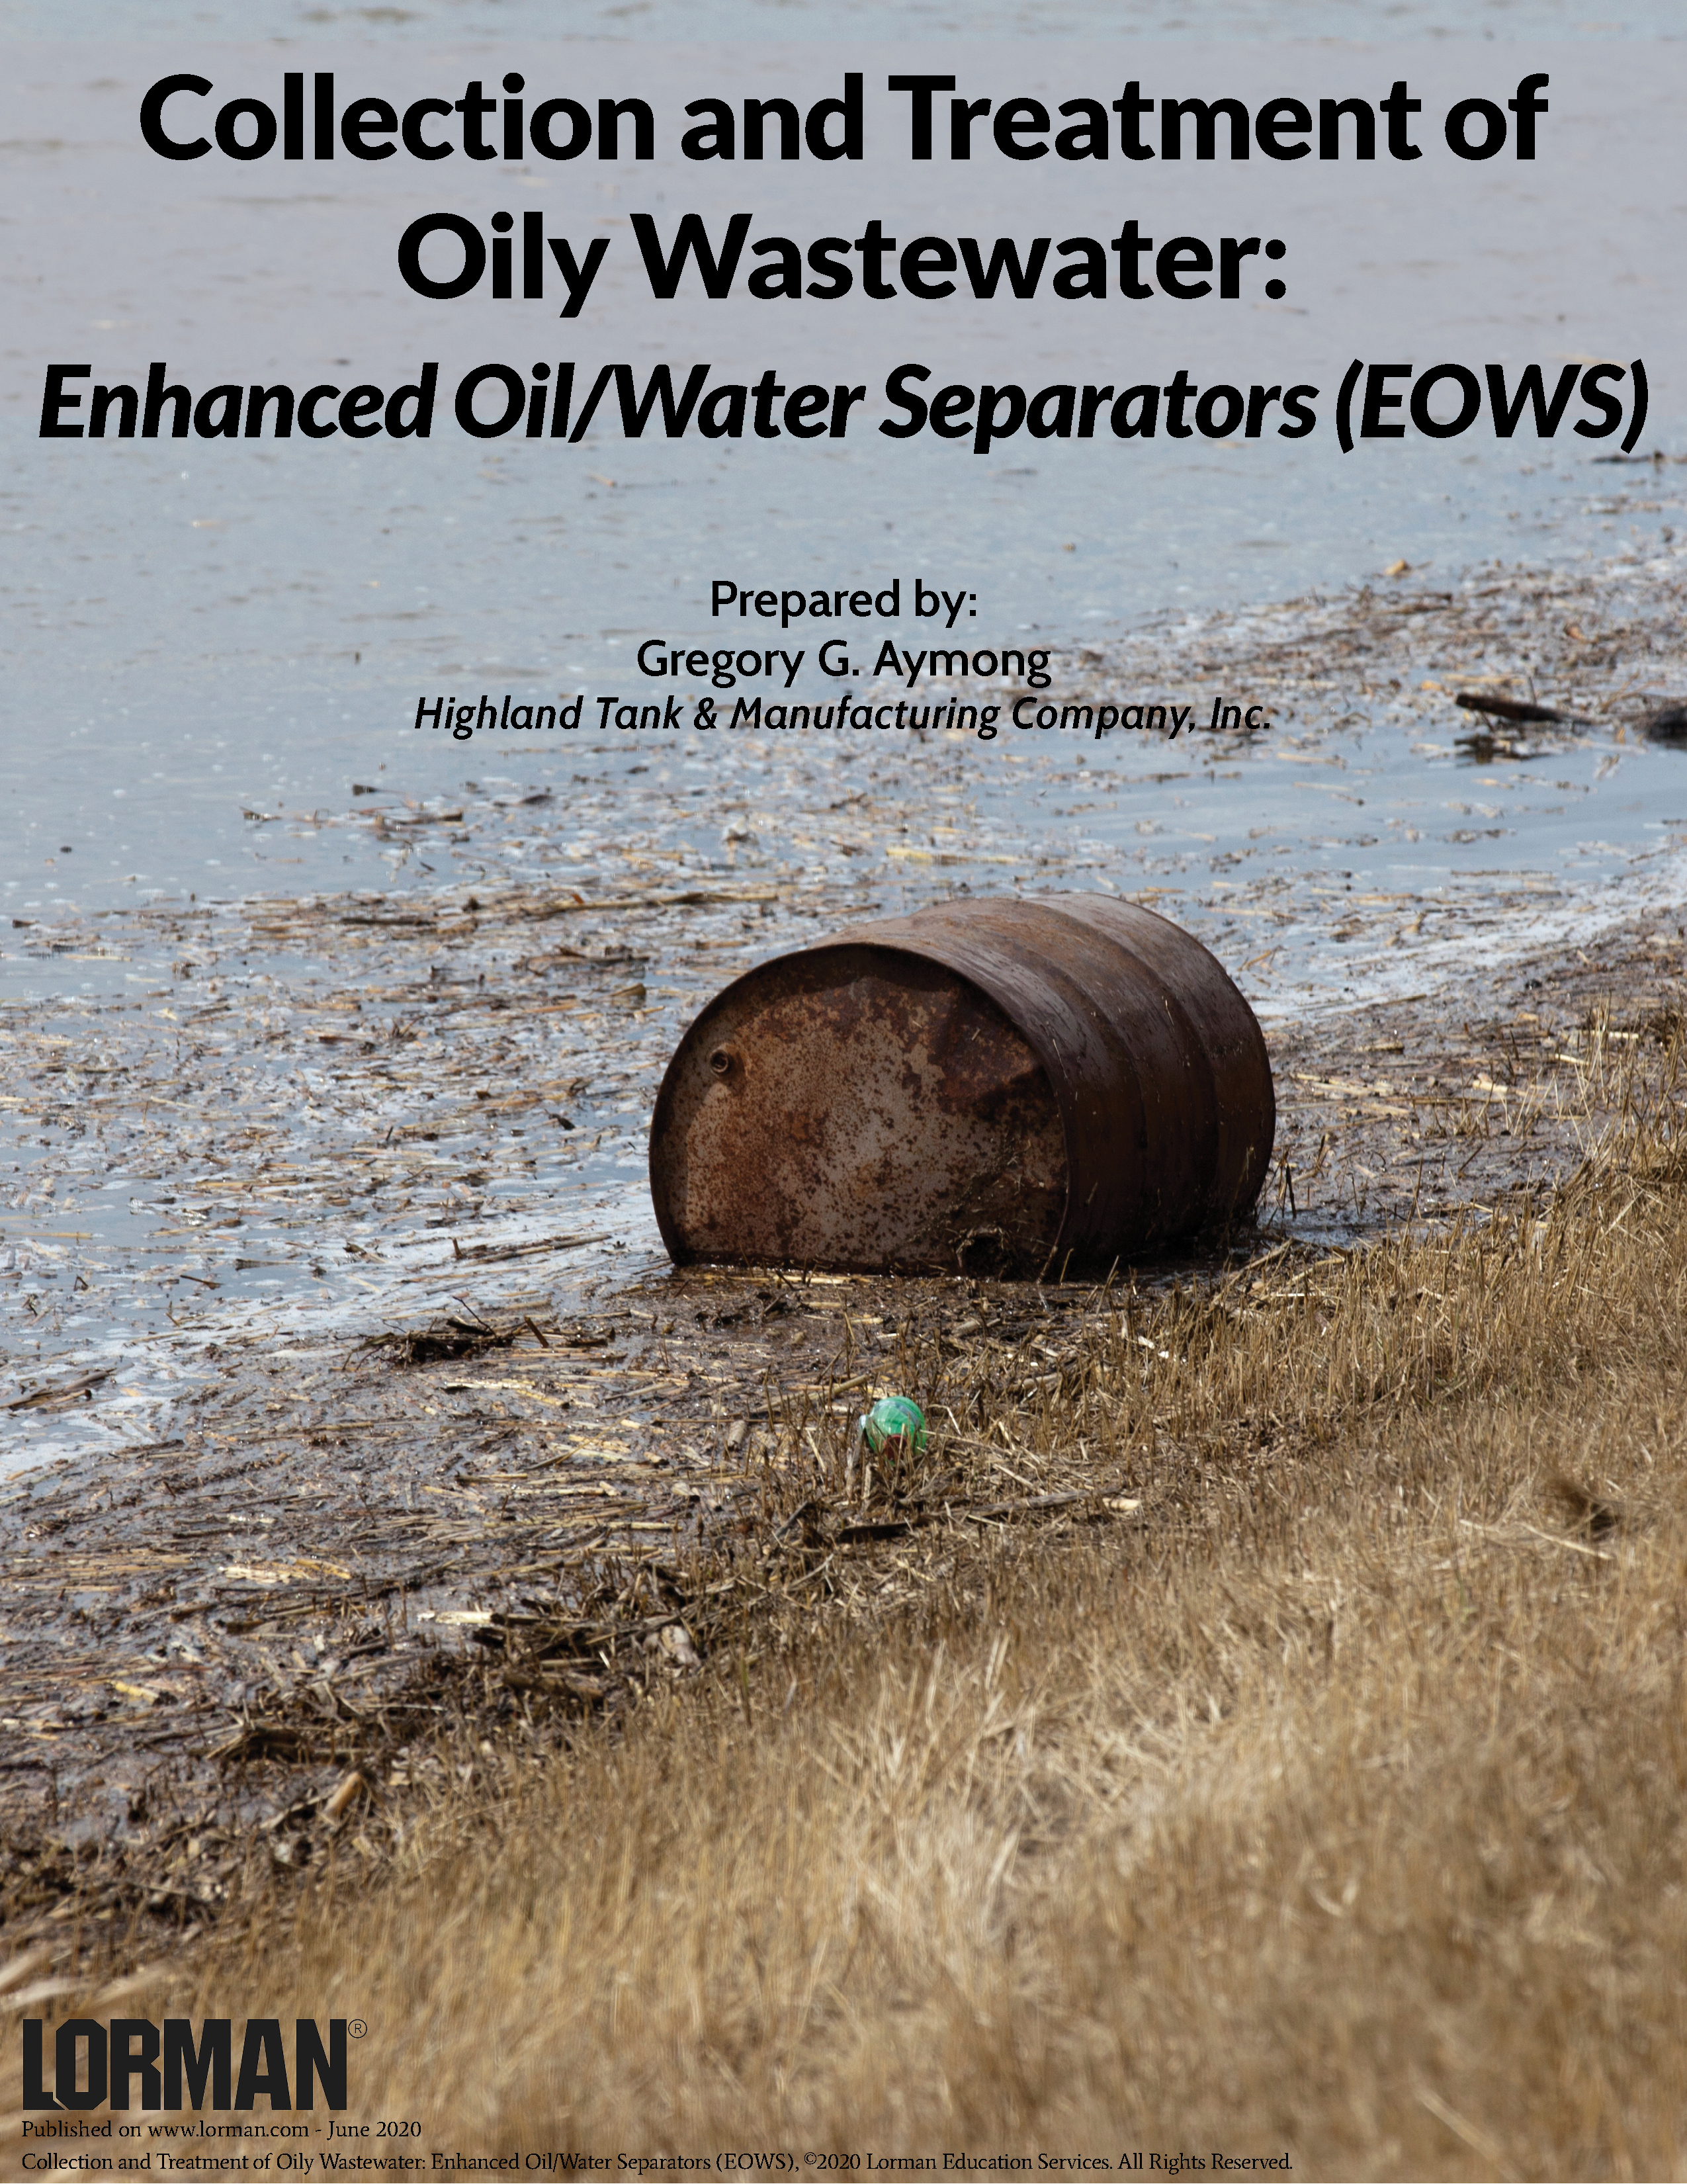 Collection and Treatment of Oily Wastewater - Enhanced Oil/Water Separators